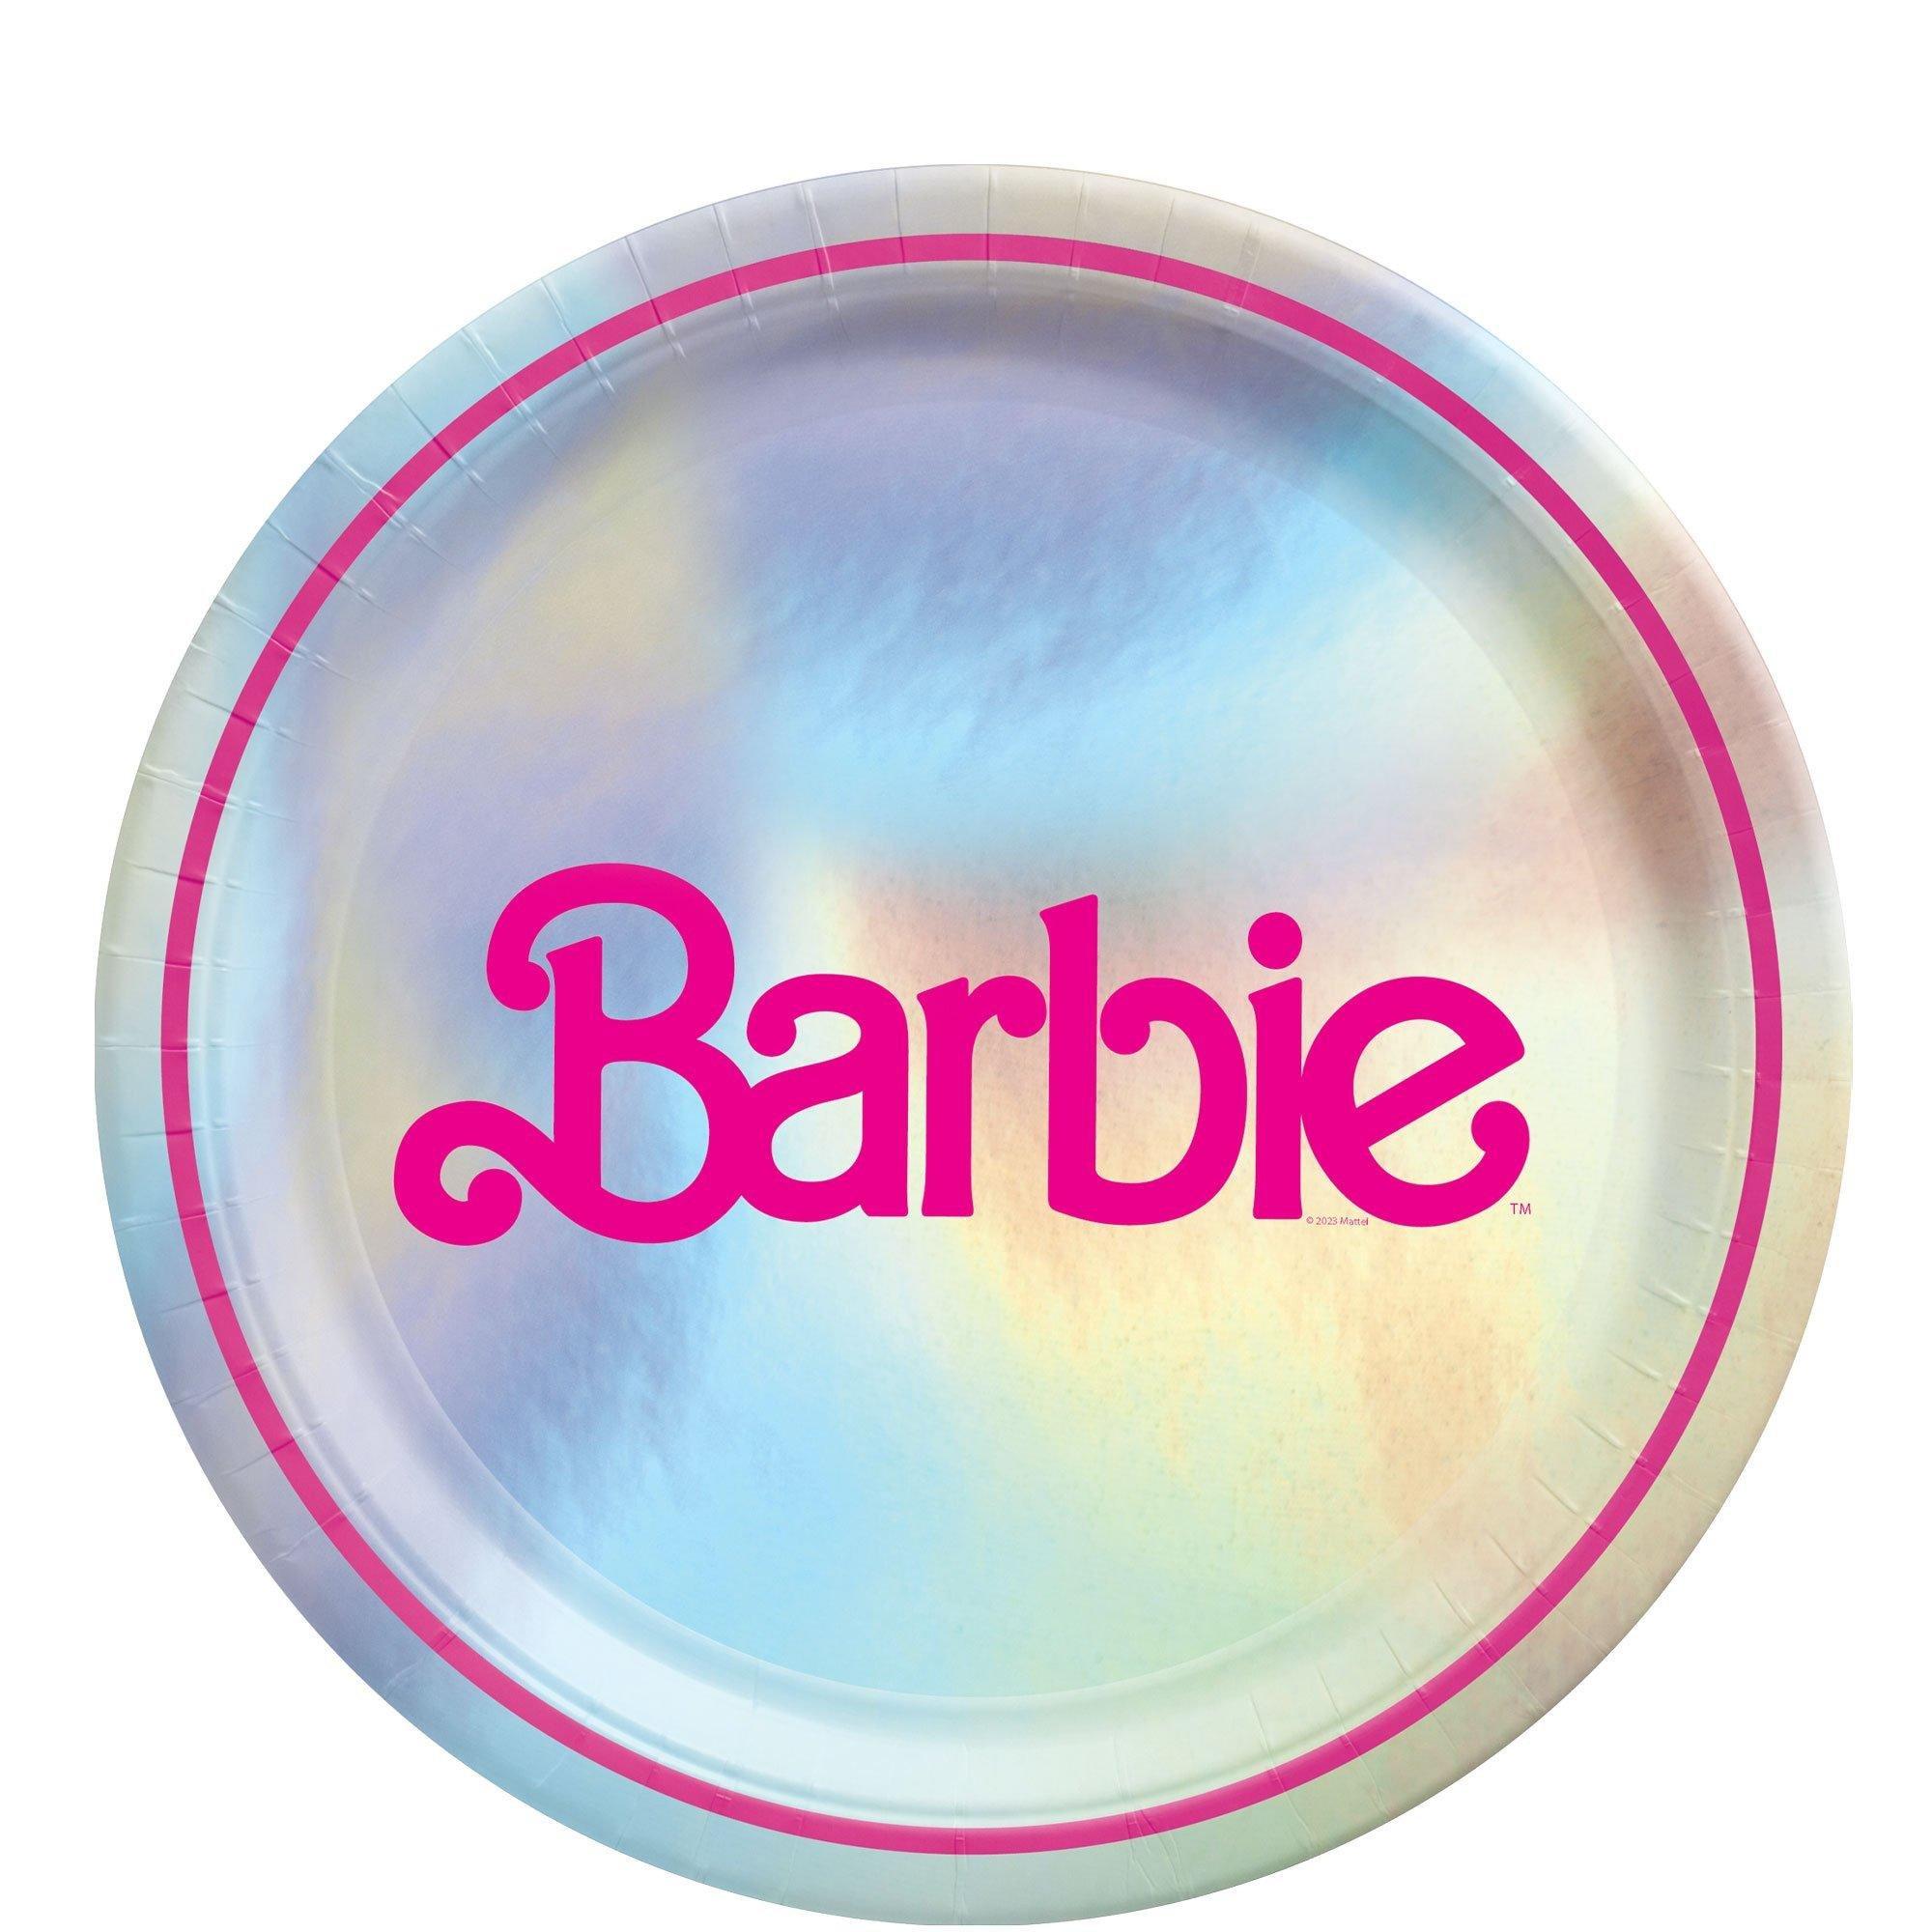 Malibu Barbie Party Kit for Guests